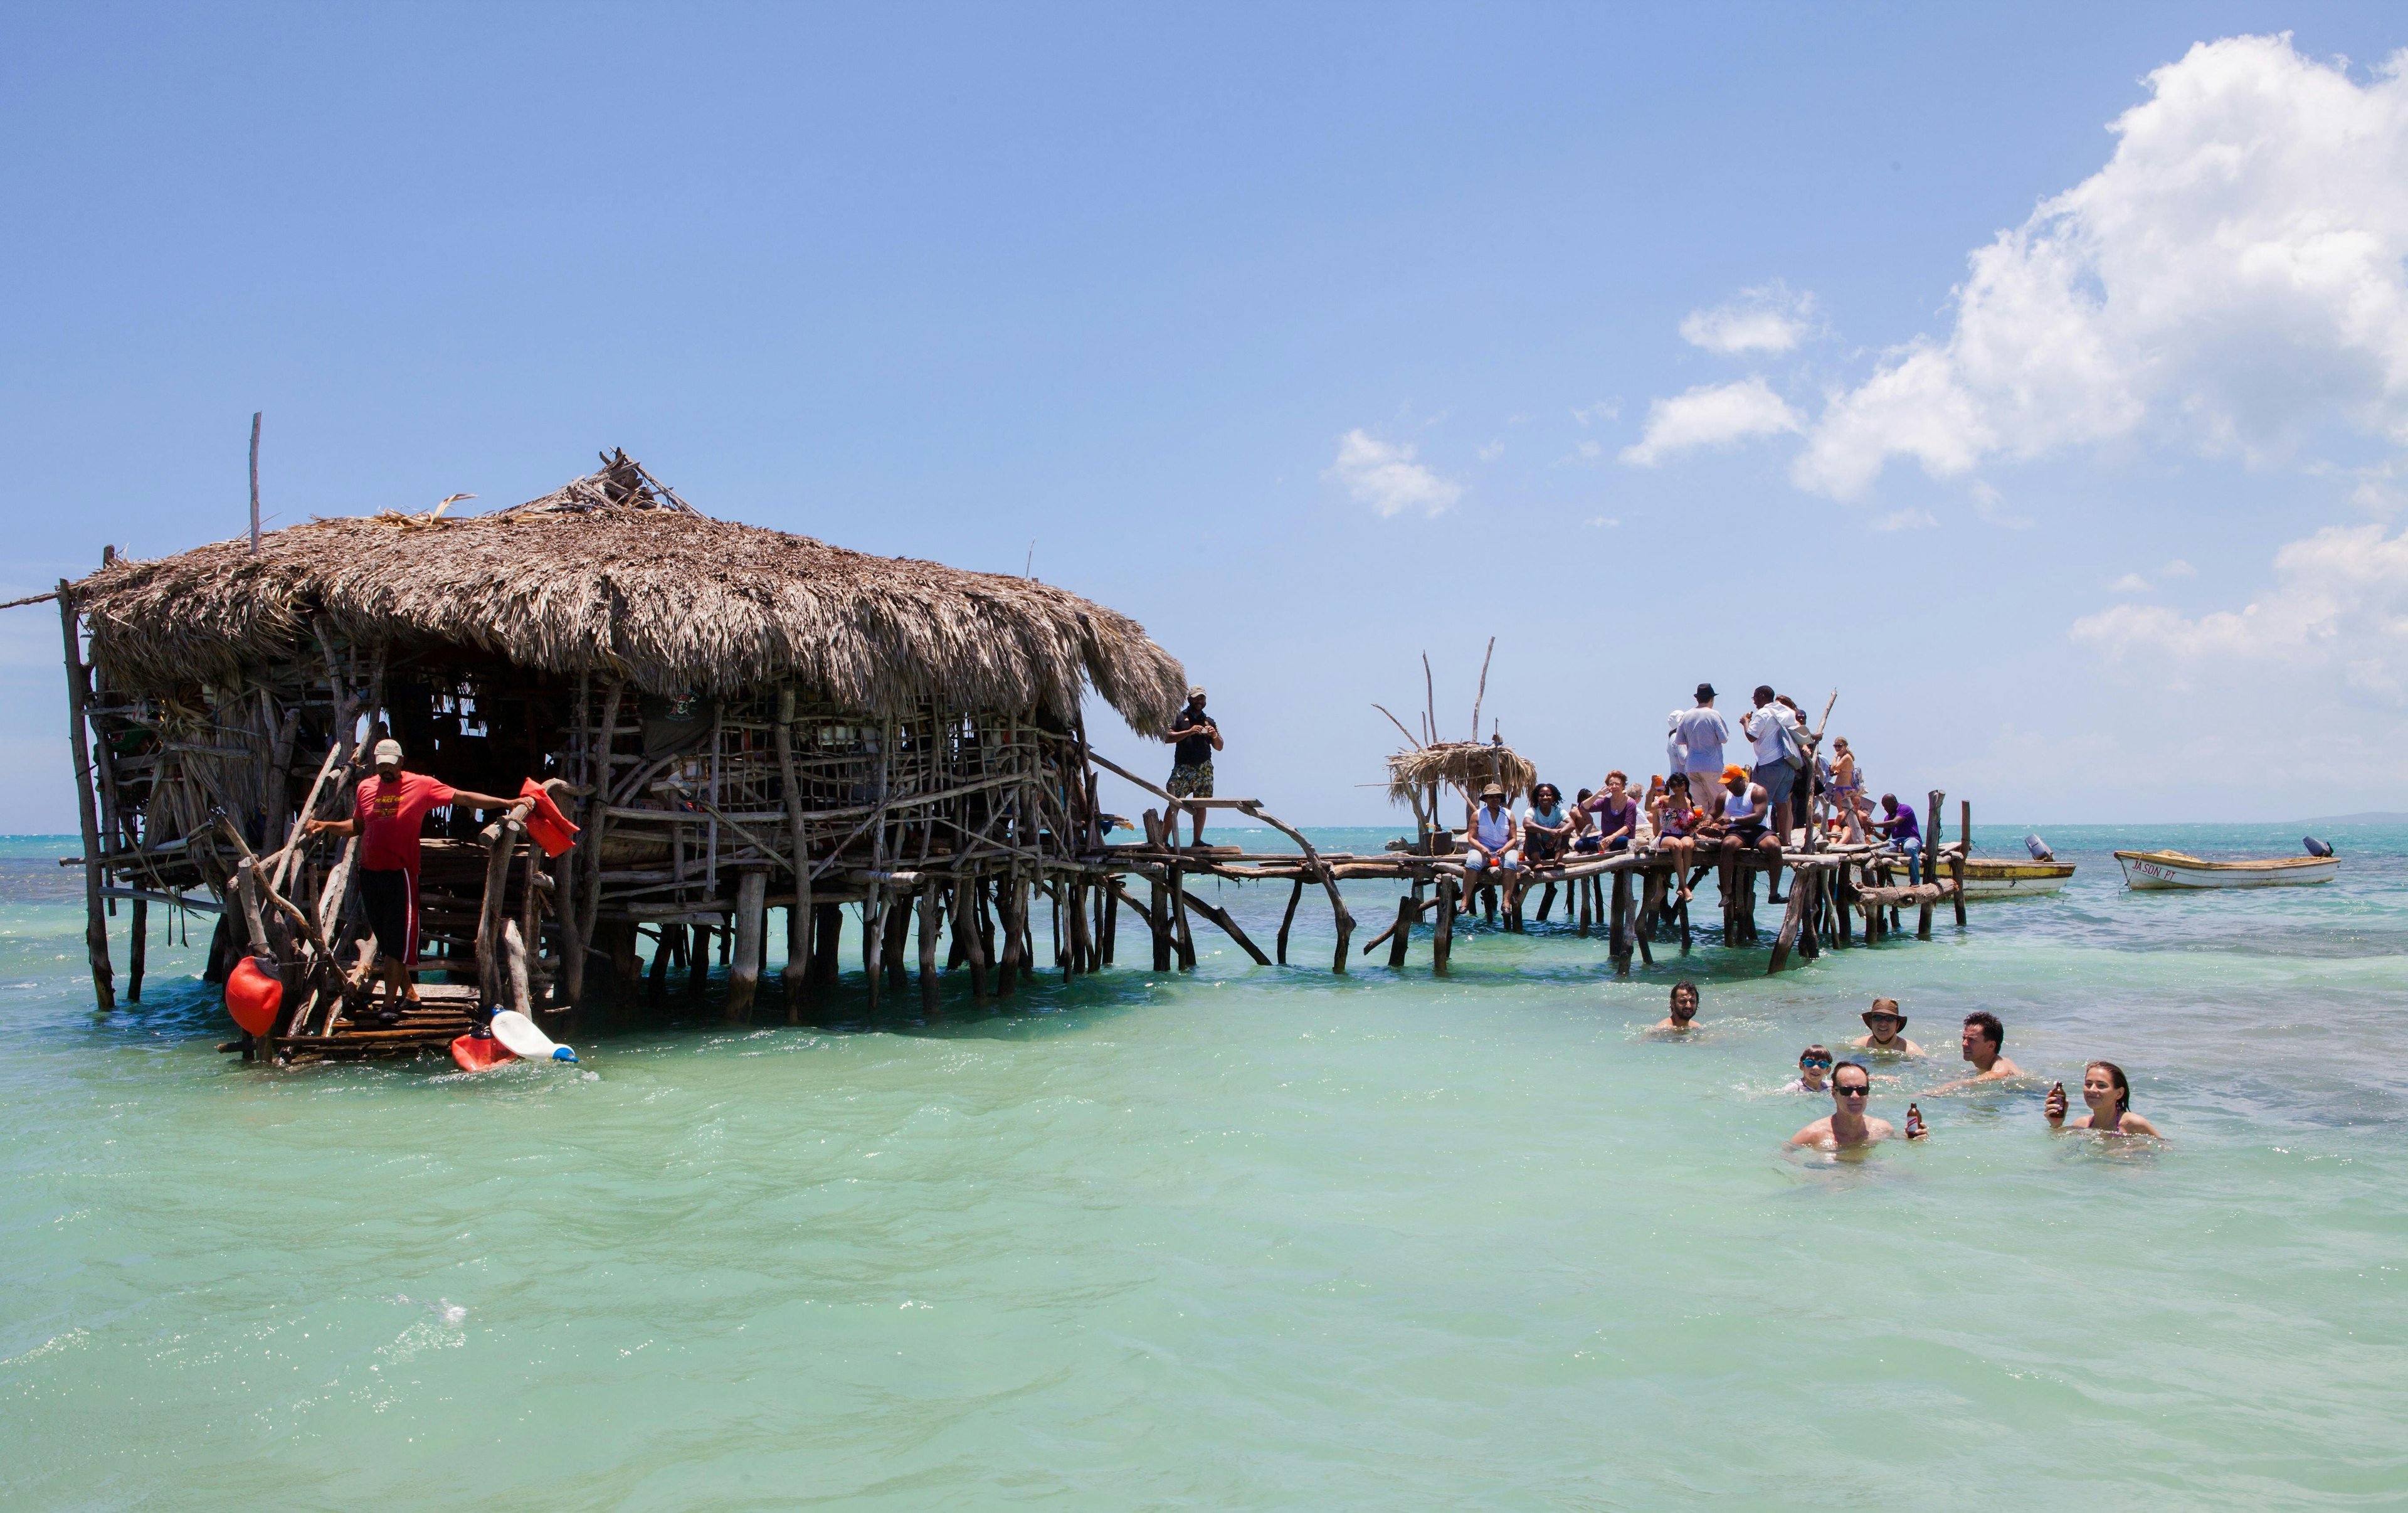 The famous Pelican bar located in the sea in Jamaica © Alamy